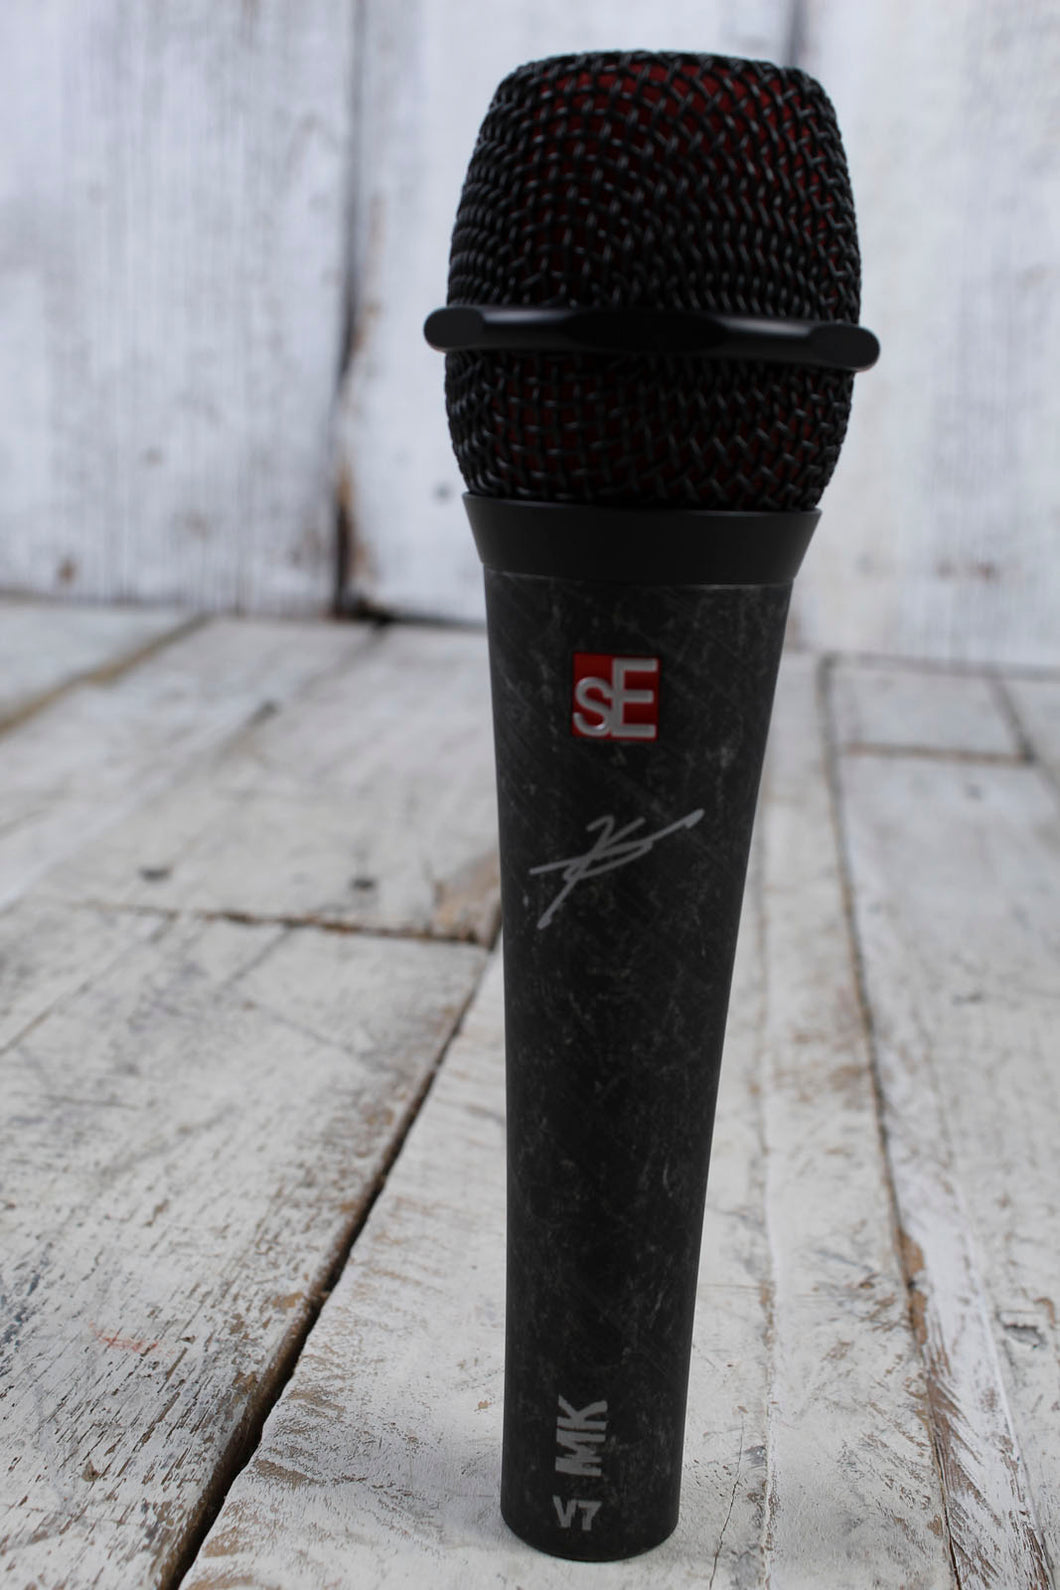 sE Myles Kennedy Signature V7 Handheld Supercardioid Dynamic Vocal Microphone